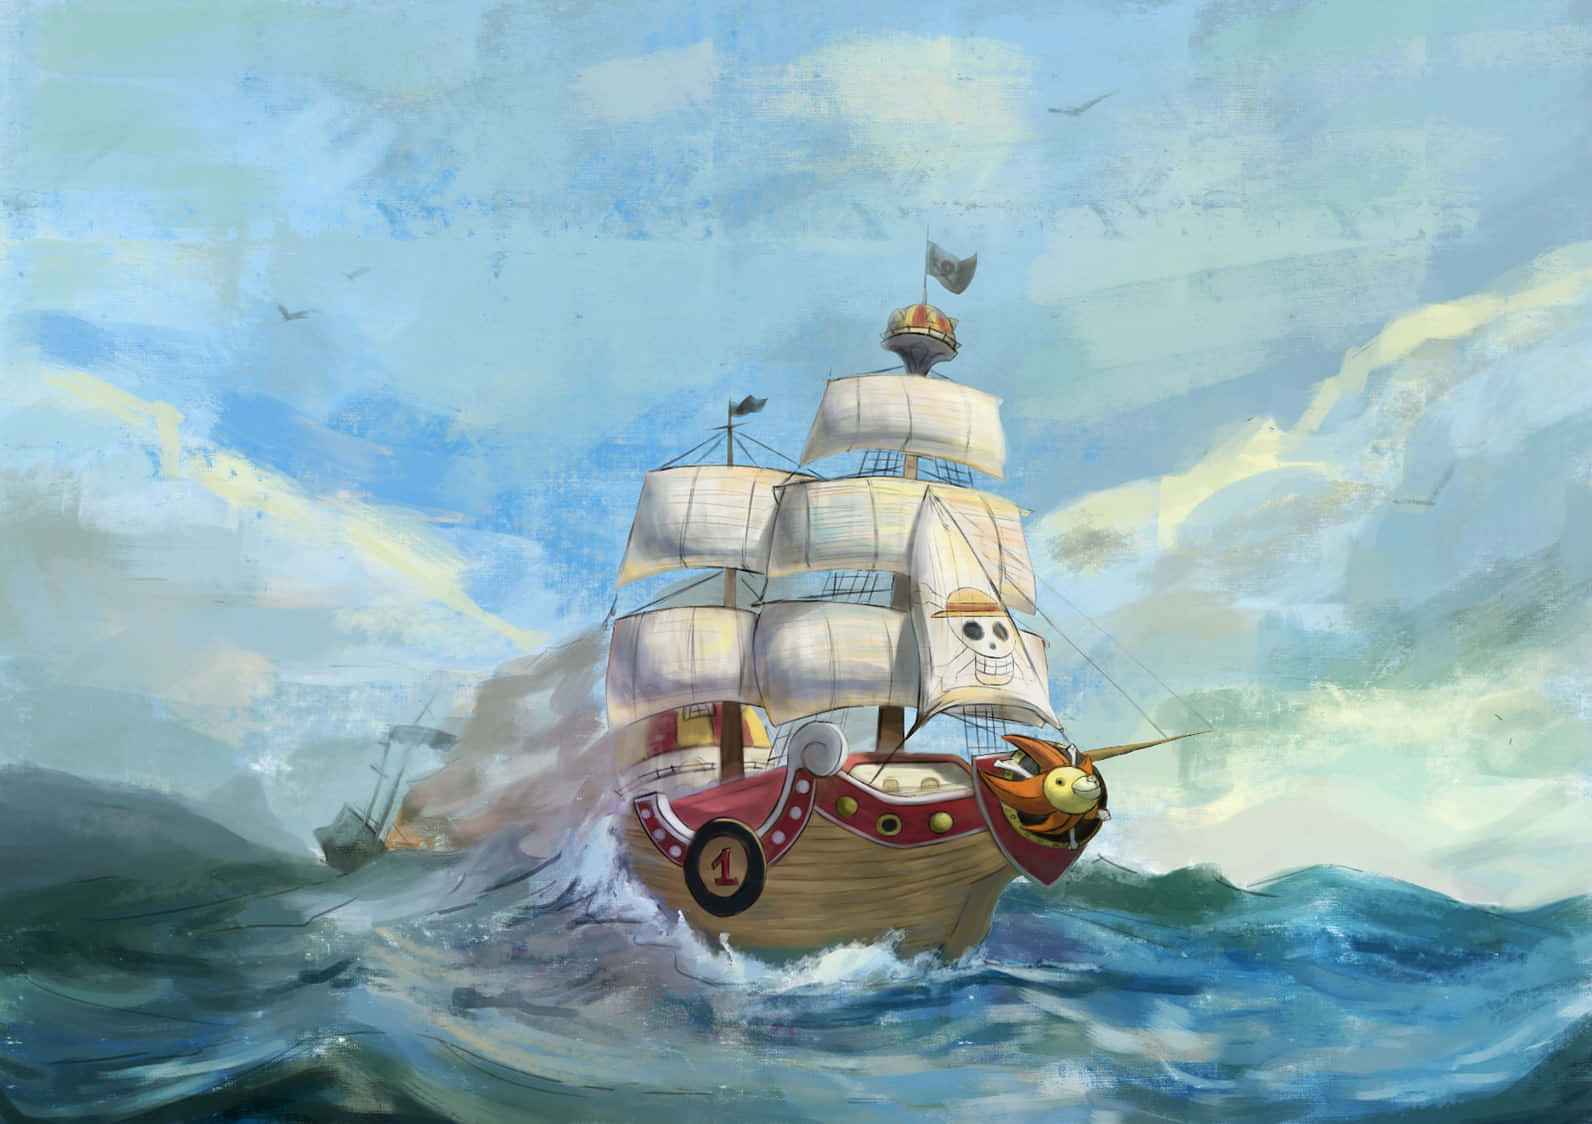 The Thousand Sunny - The Iconic Pirate Ship of the Straw Hat Pirates" Wallpaper